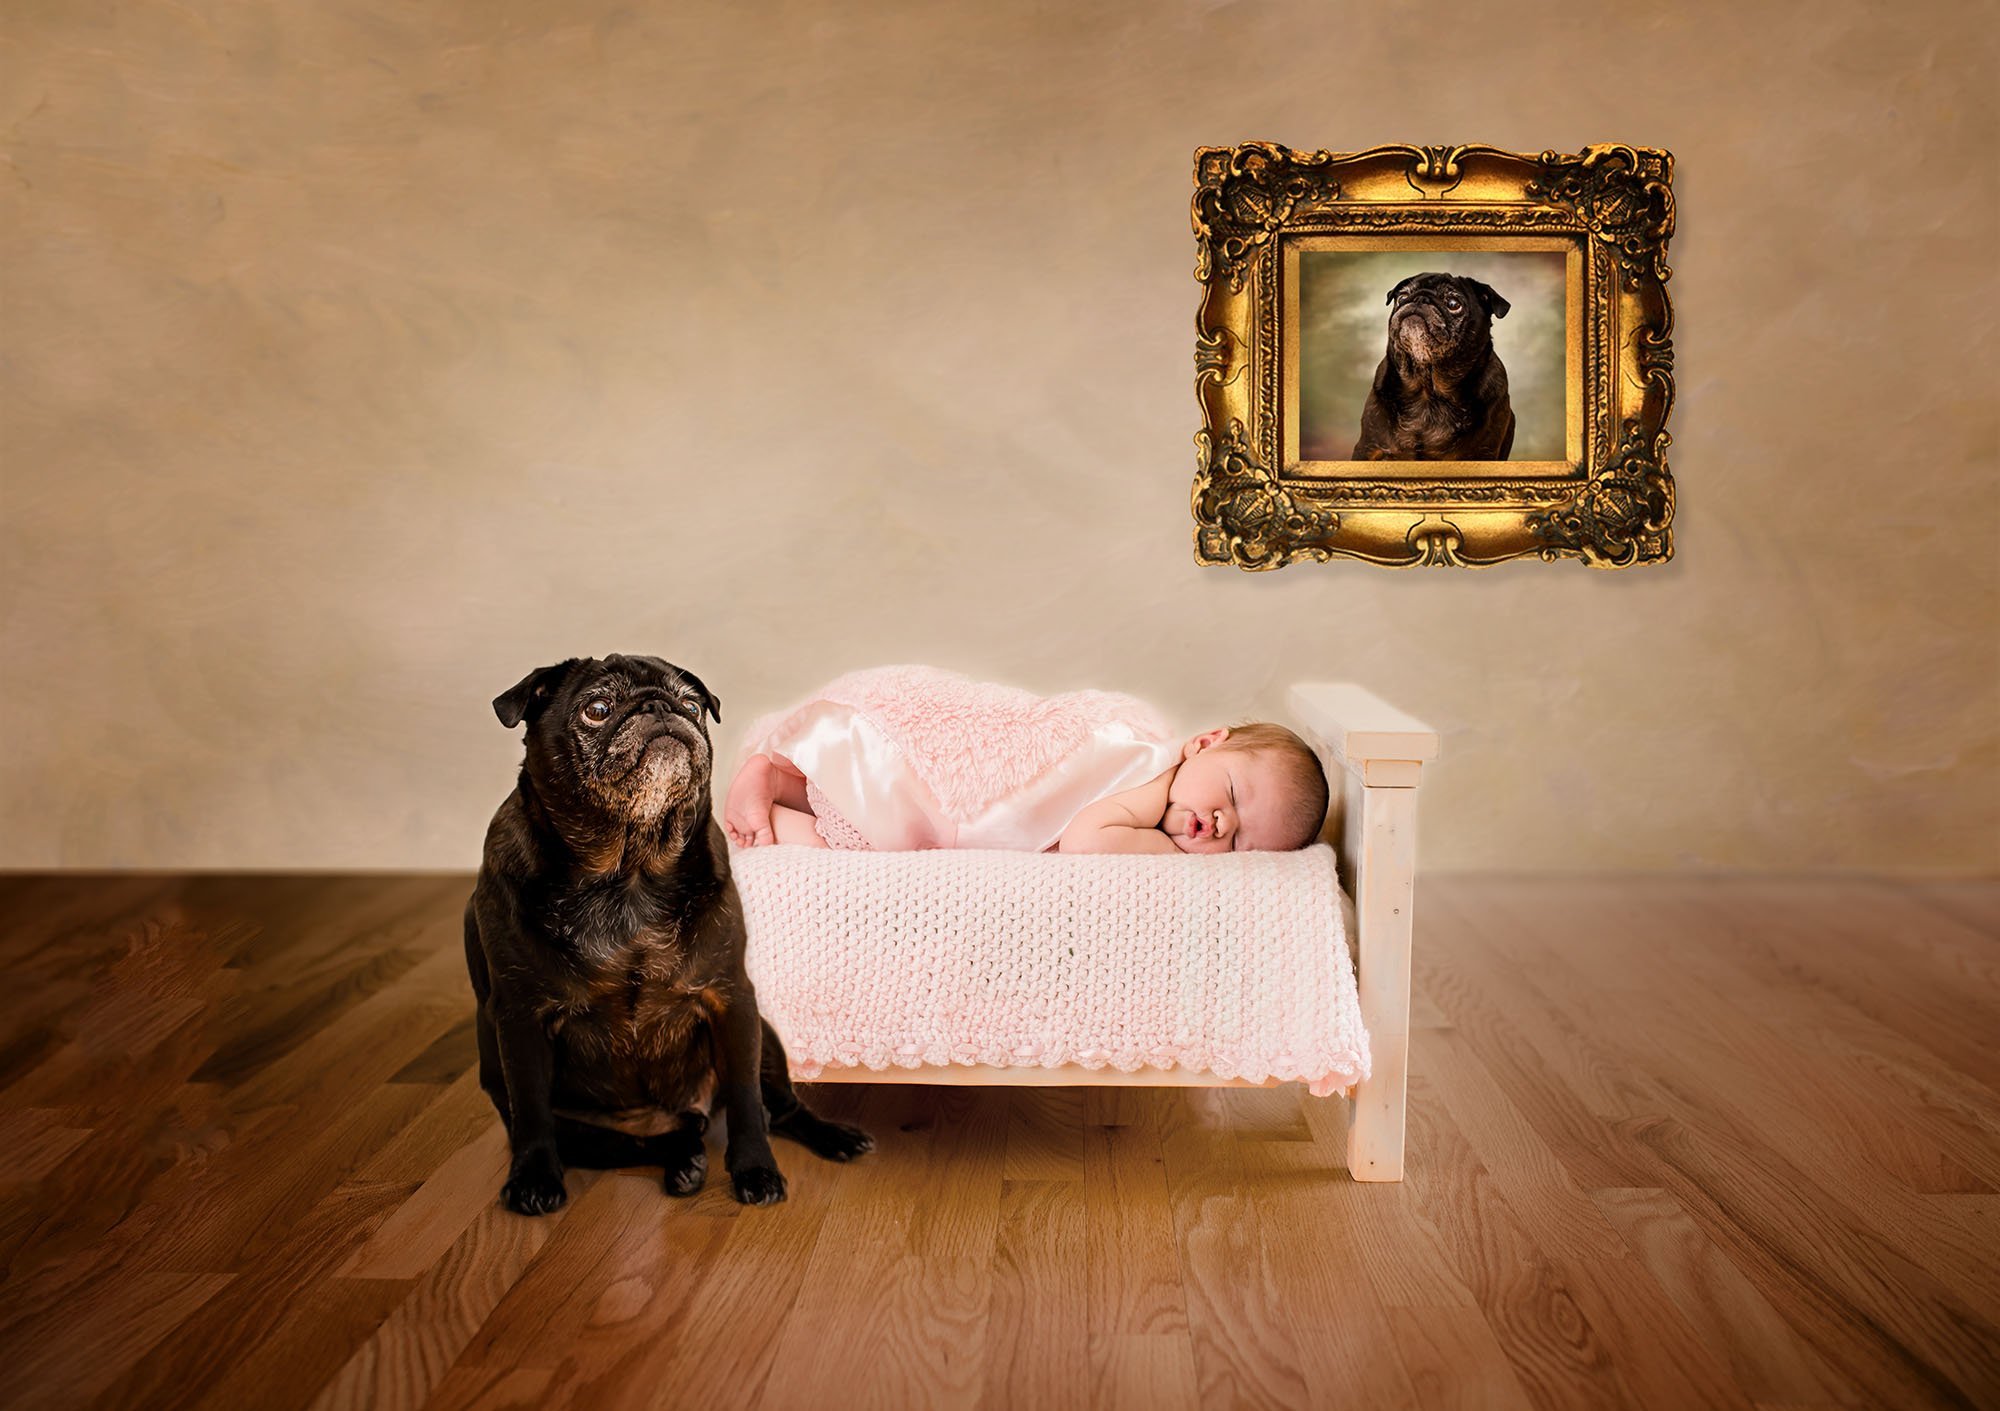 newborn baby sleeping in bed while pug dog looks lovingly on a photo of himself One Big Happy Photo